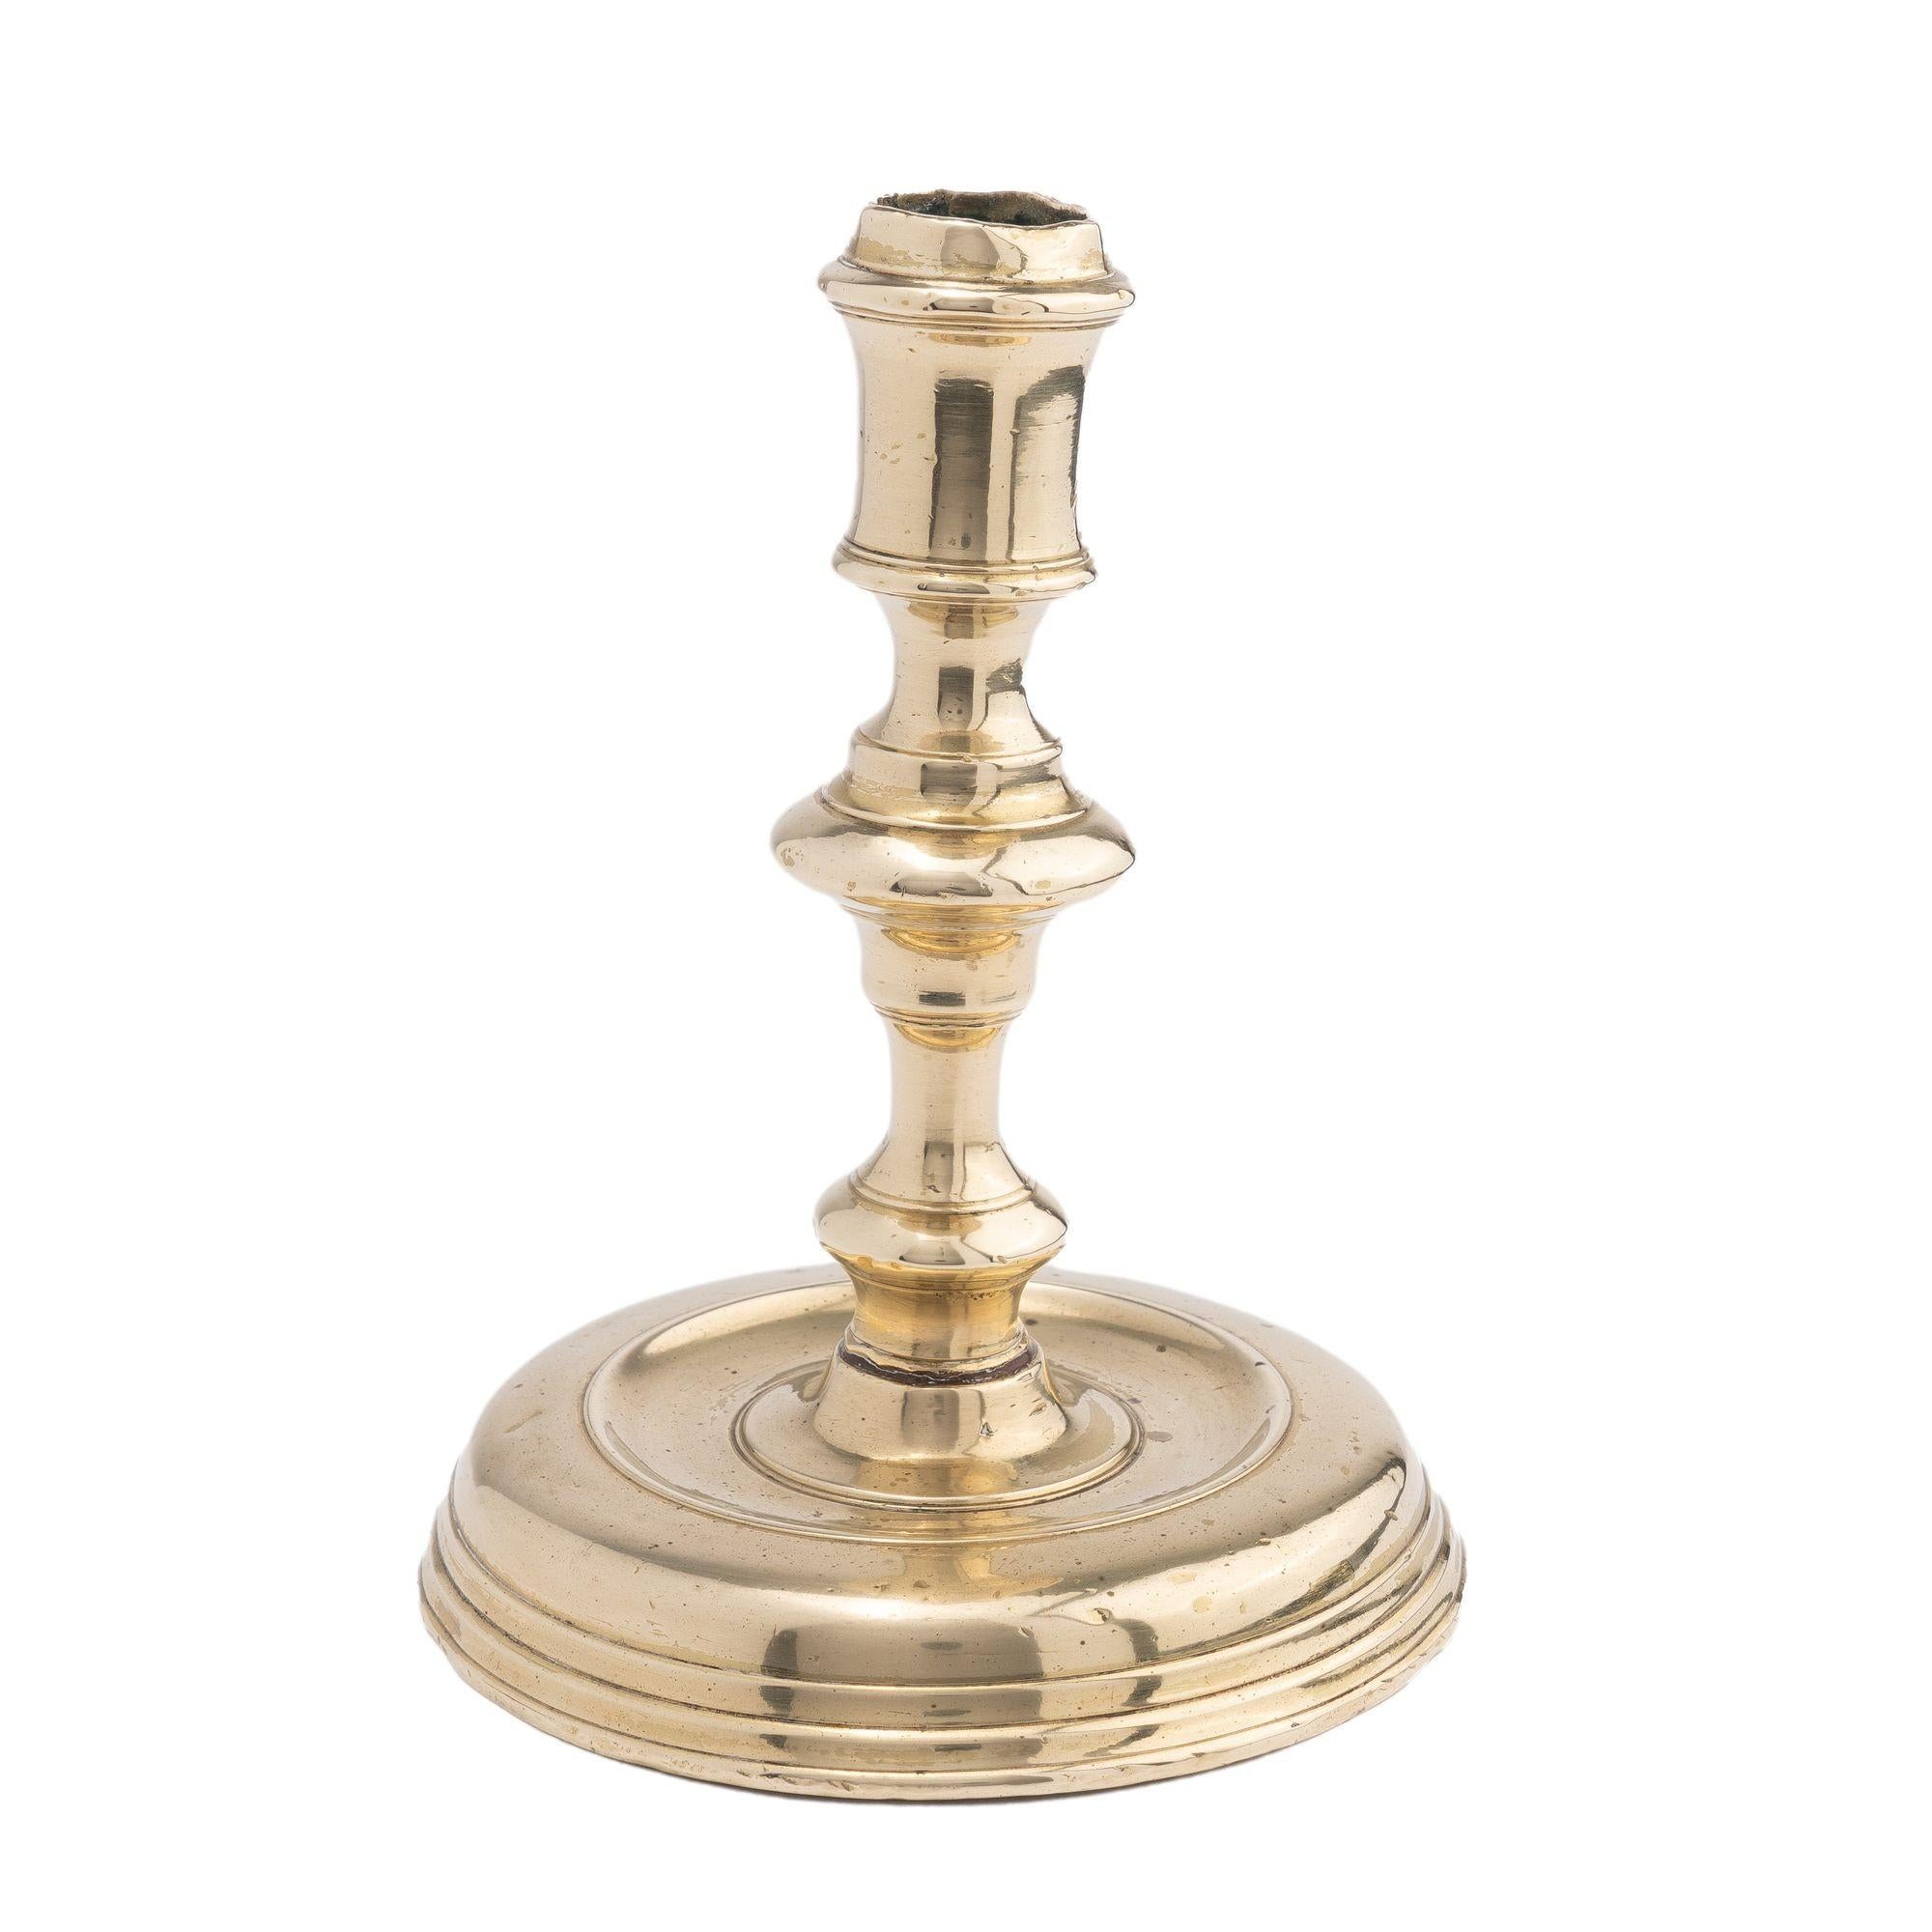 Cast brass baluster shaft & candle cup candlestick threaded to a circular base

France, circa 1720.